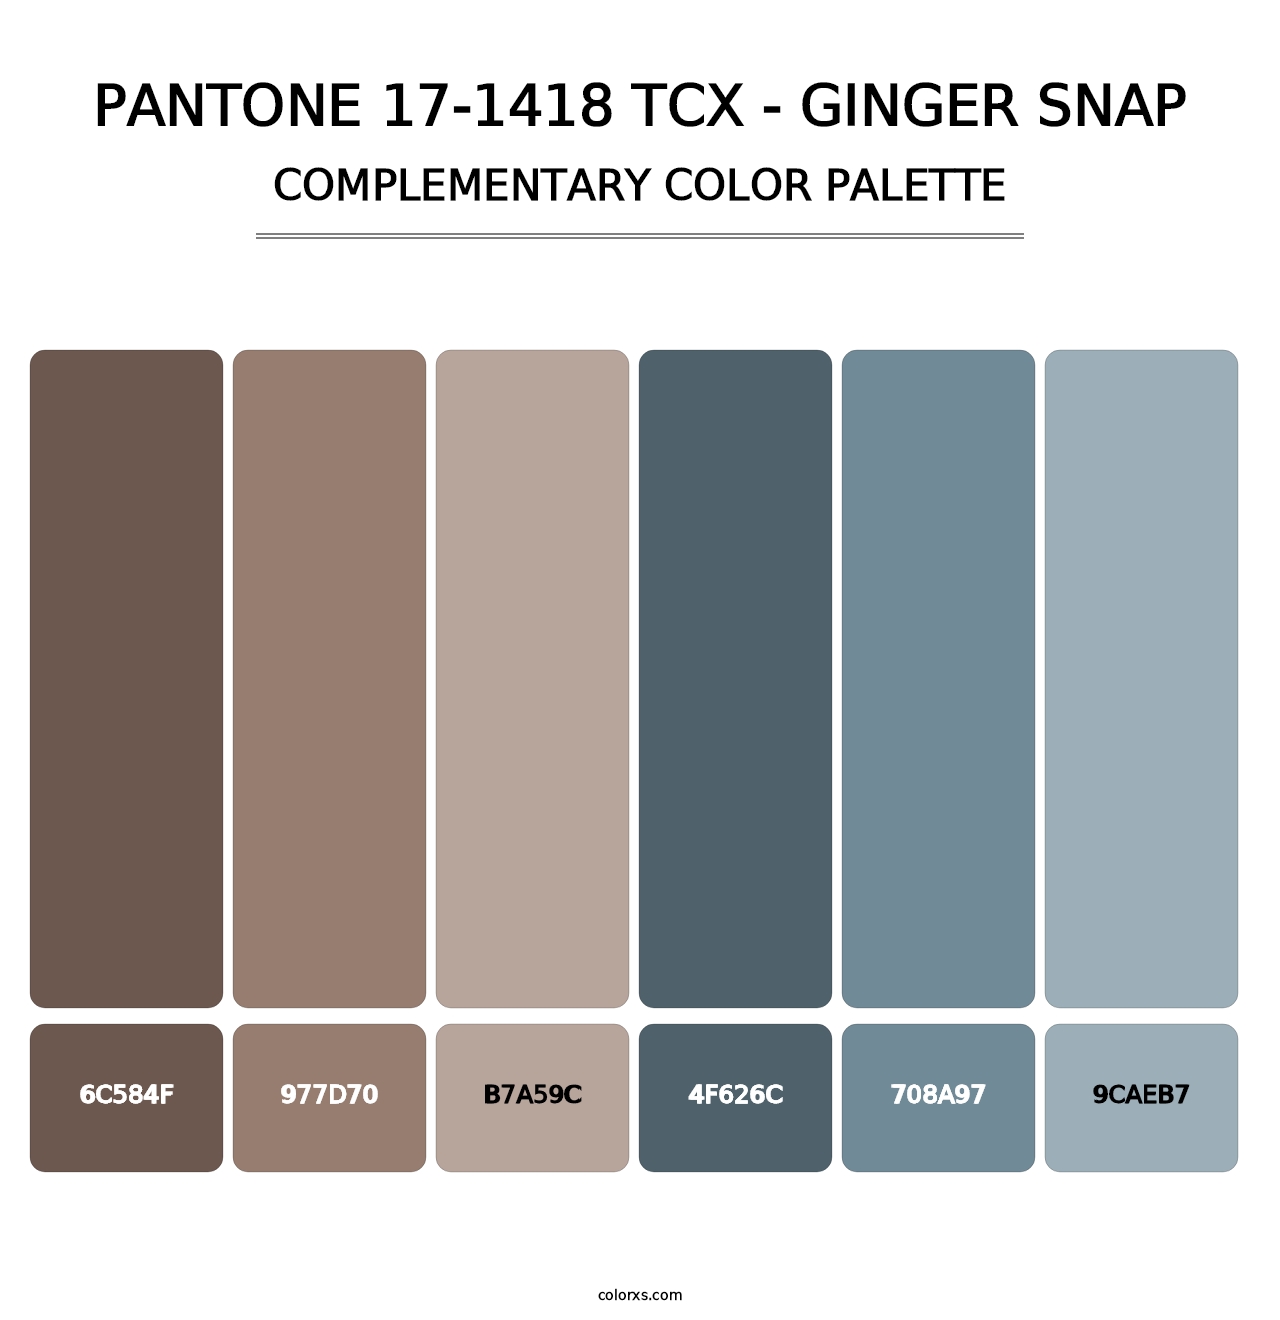 PANTONE 17-1418 TCX - Ginger Snap - Complementary Color Palette